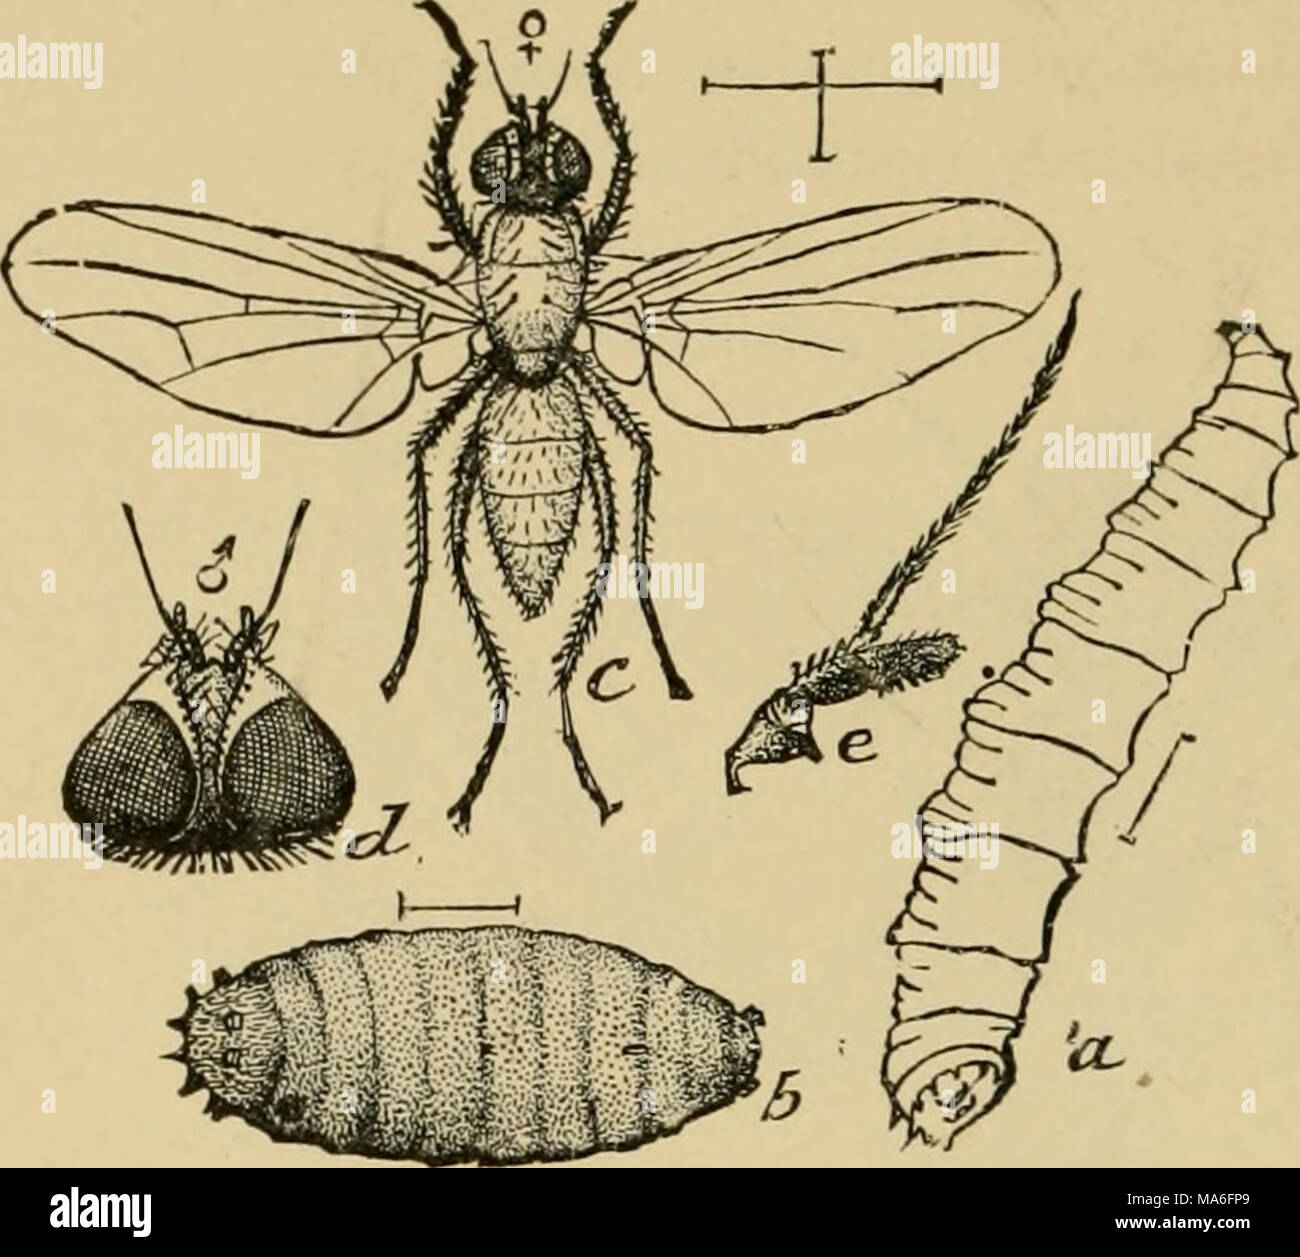 . Elementary entomology . FlG. 378. The cabbage-maggot. (Enlarged) i7, larva ; l&gt;, pupa ; c, adult; d, head ; c, antenna. (After Riley) in build. maggot and onion-maggot are well-known examples of these inju- rious larvce, and wherever small flies are seen hovering around these or other root crops, such as radishes, turnips, beets, etc., Stock Photo